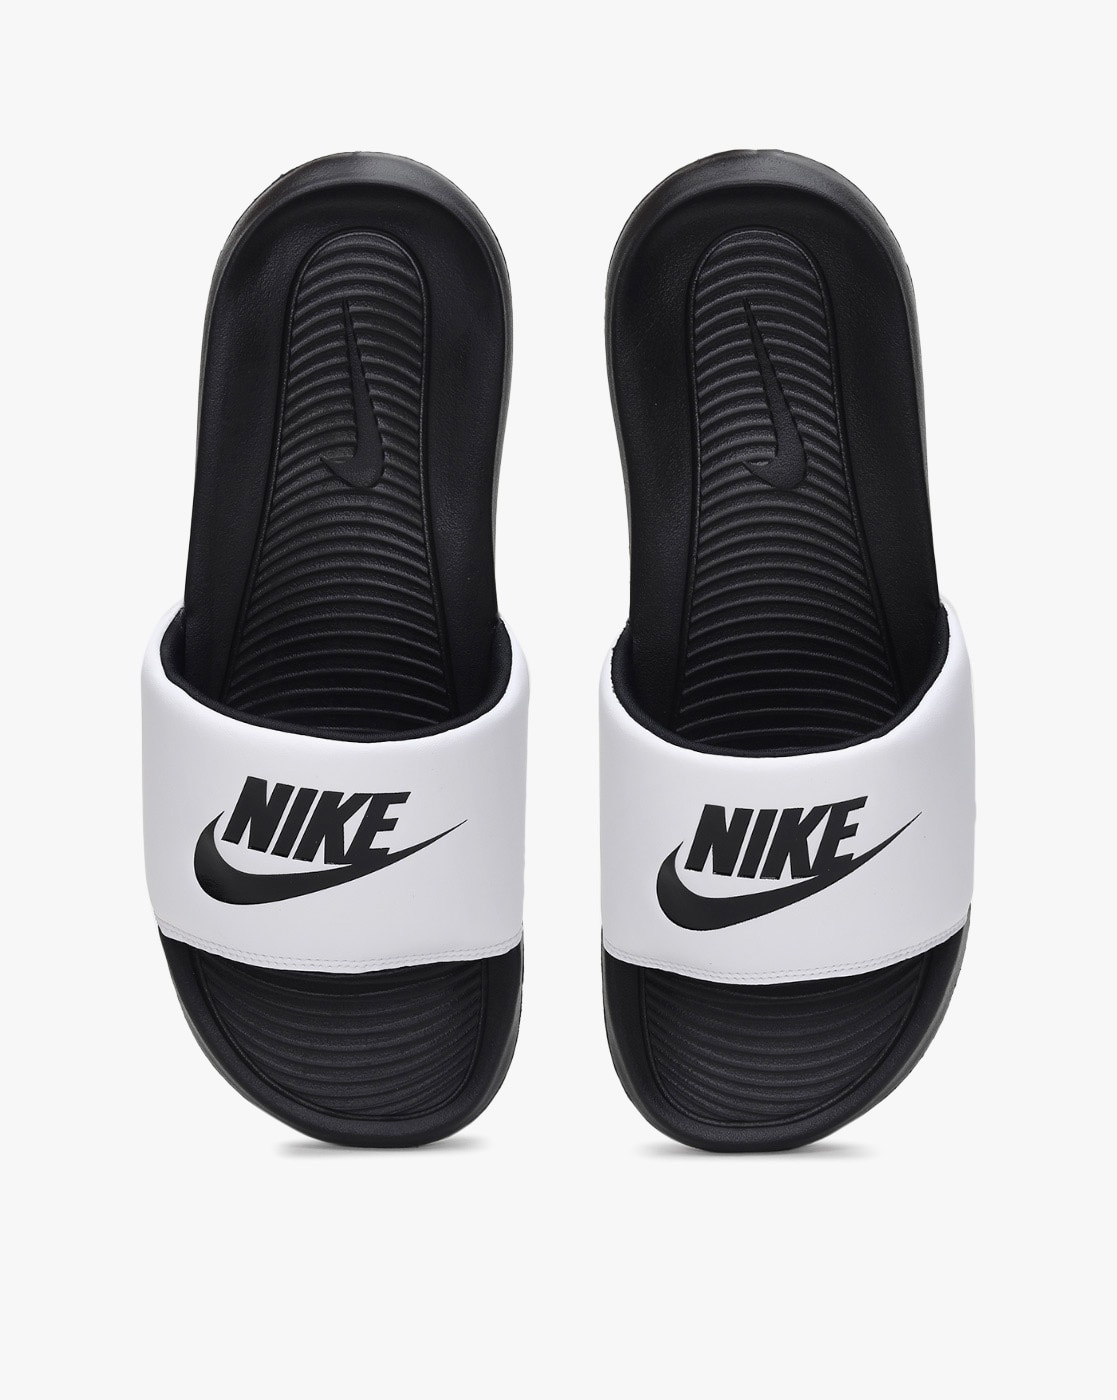 ORIGINAL NIKE SLIPPERS PM ME... - Mitochondria Online Shop | Facebook-tuongthan.vn